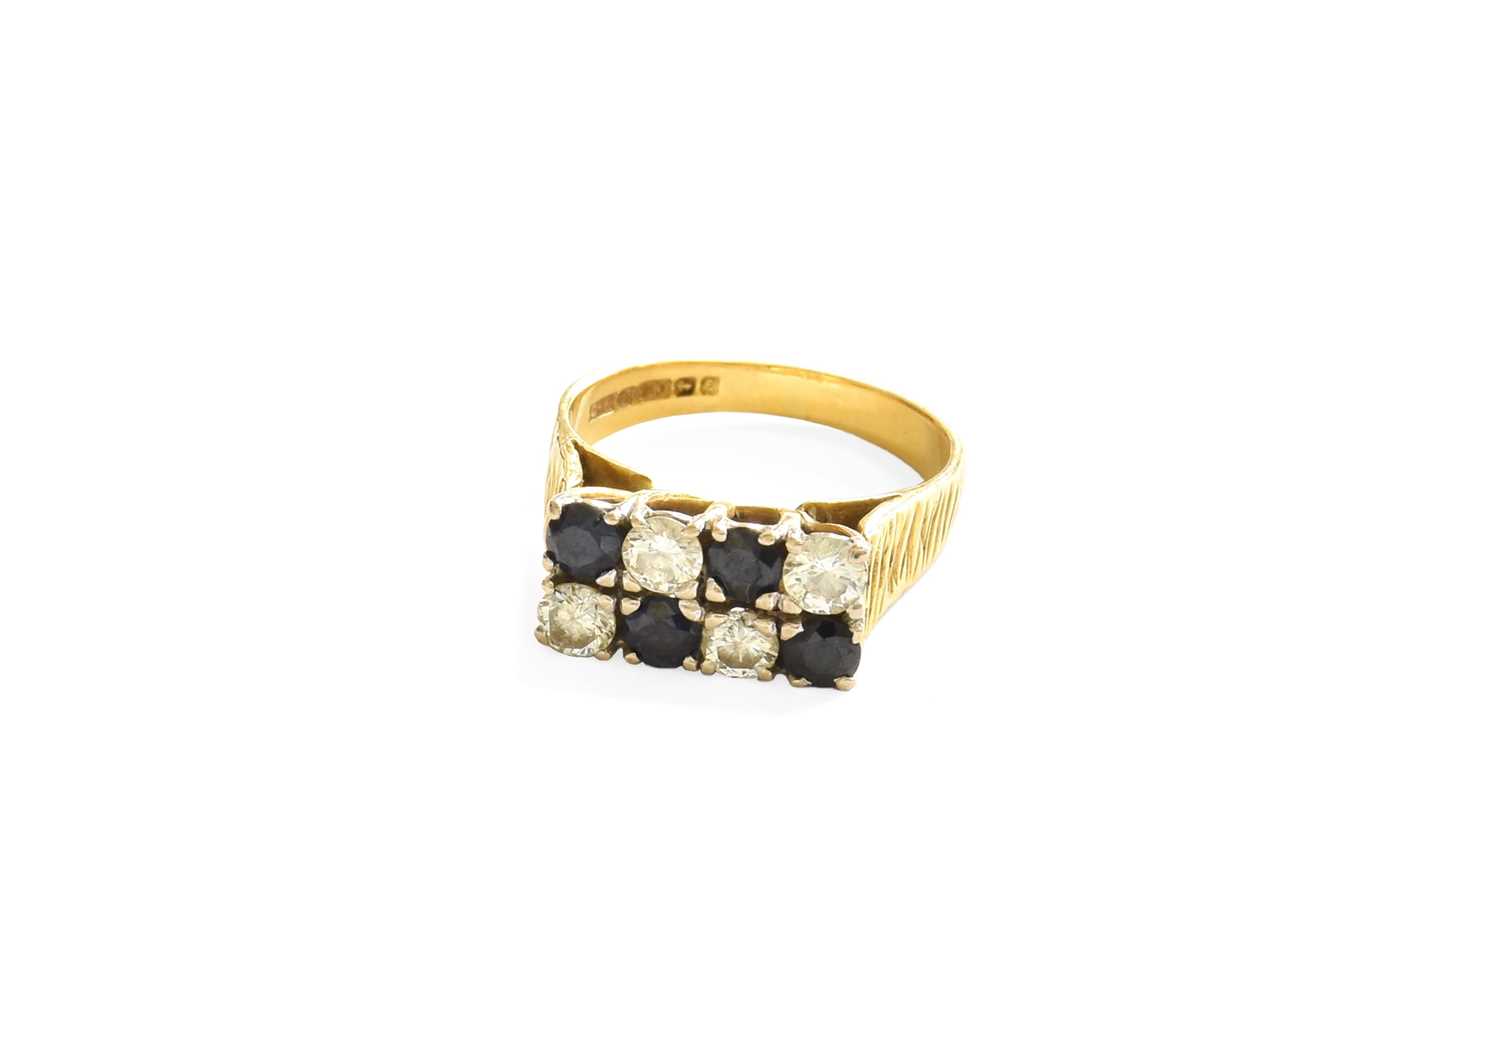 An 18 Carat Gold Sapphire and Diamond Ring, formed of two rows of alternating round brilliant cut